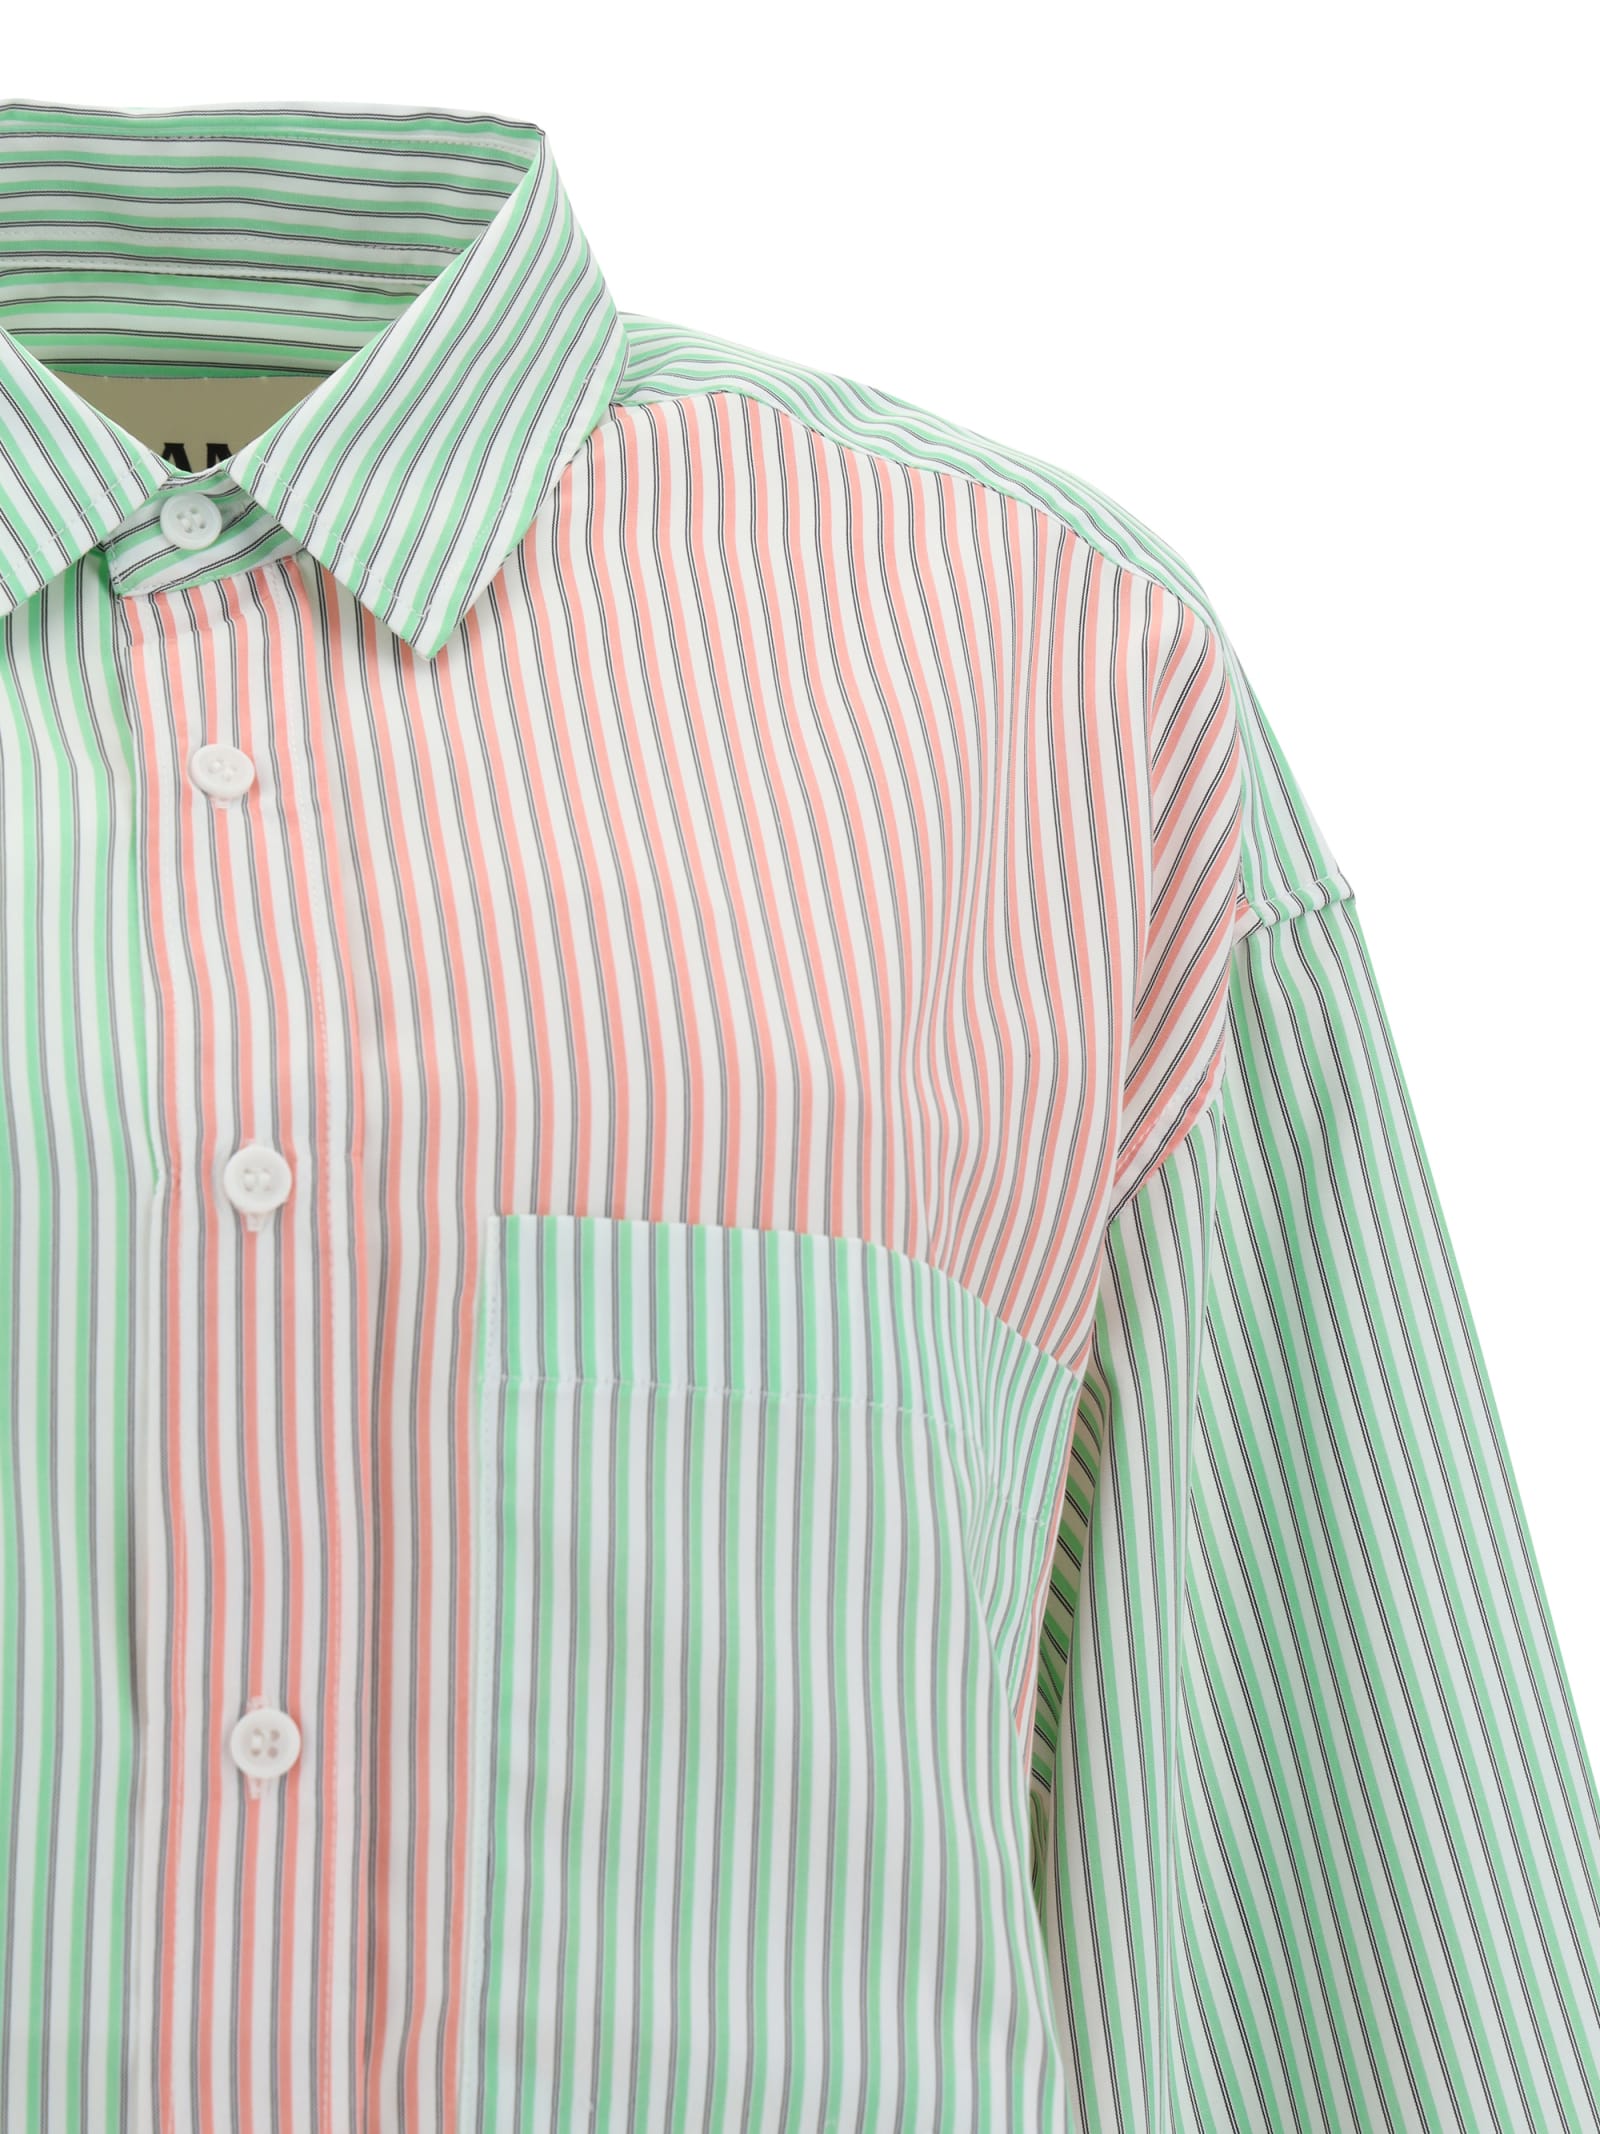 Shop Blanca Benny Shirt In Lime/pink